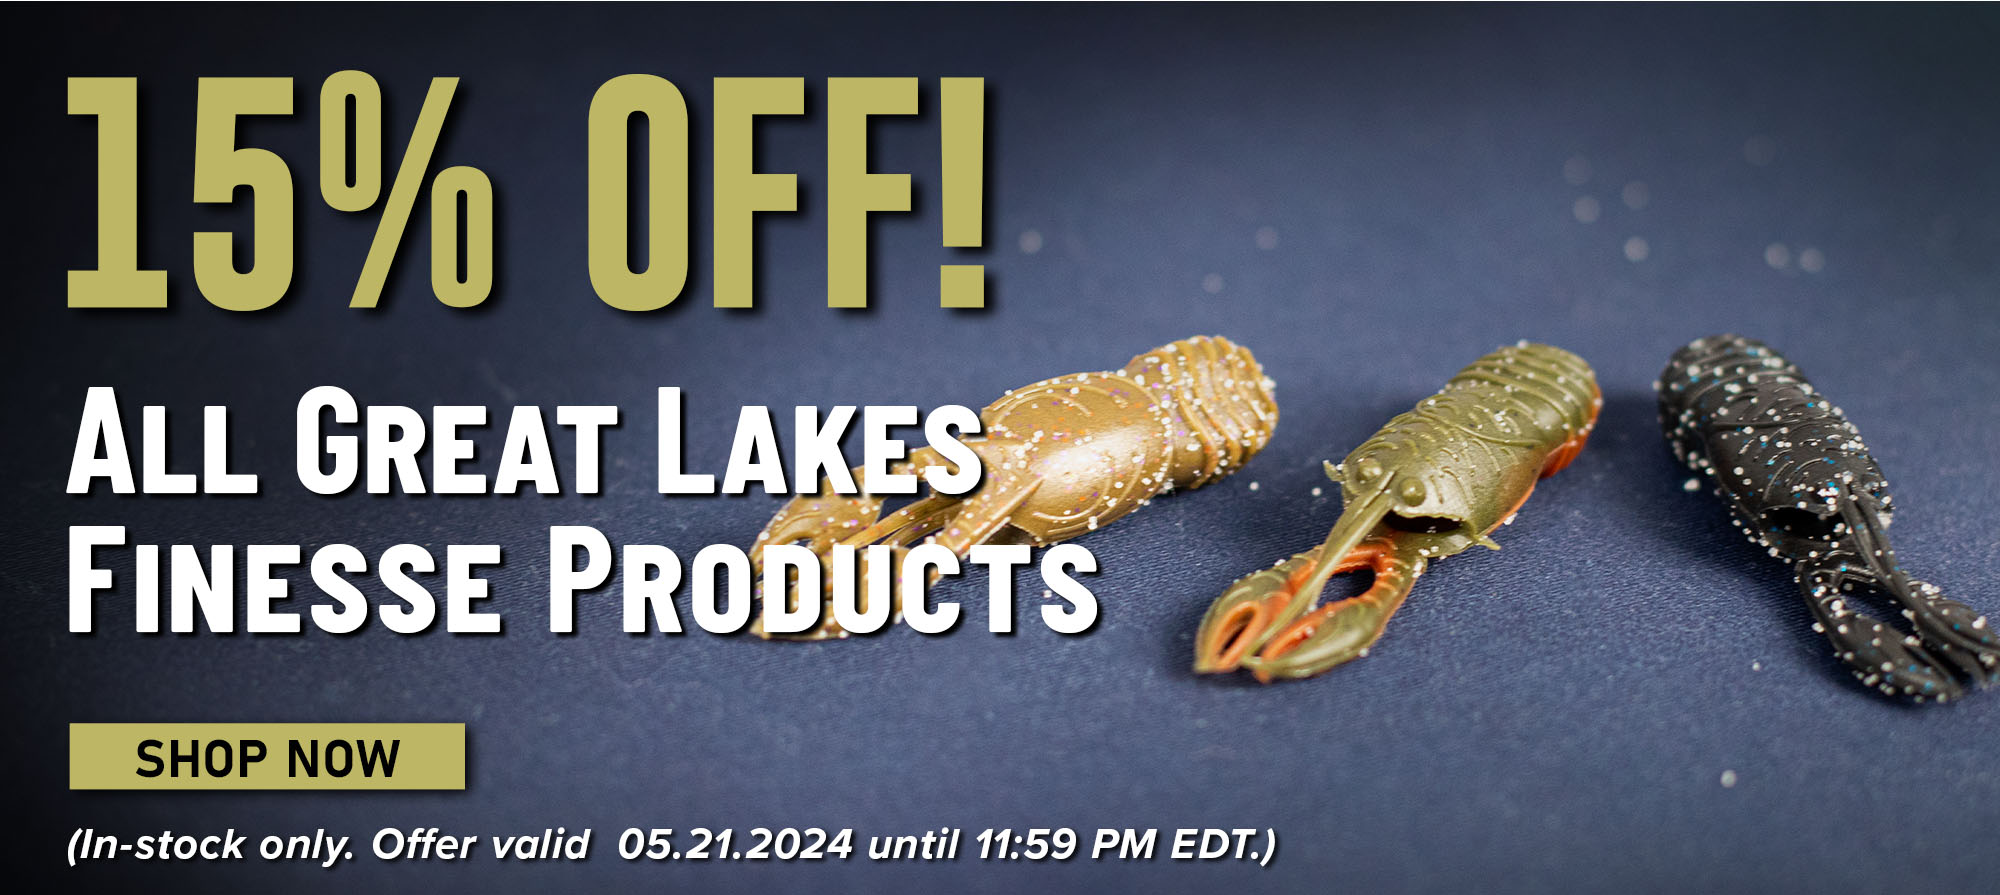 15% Off! All Great Lakes Finesse Products Shop Now (In-stock only. Offer valid 05.21.2024 until 11:59 PM EDT.)